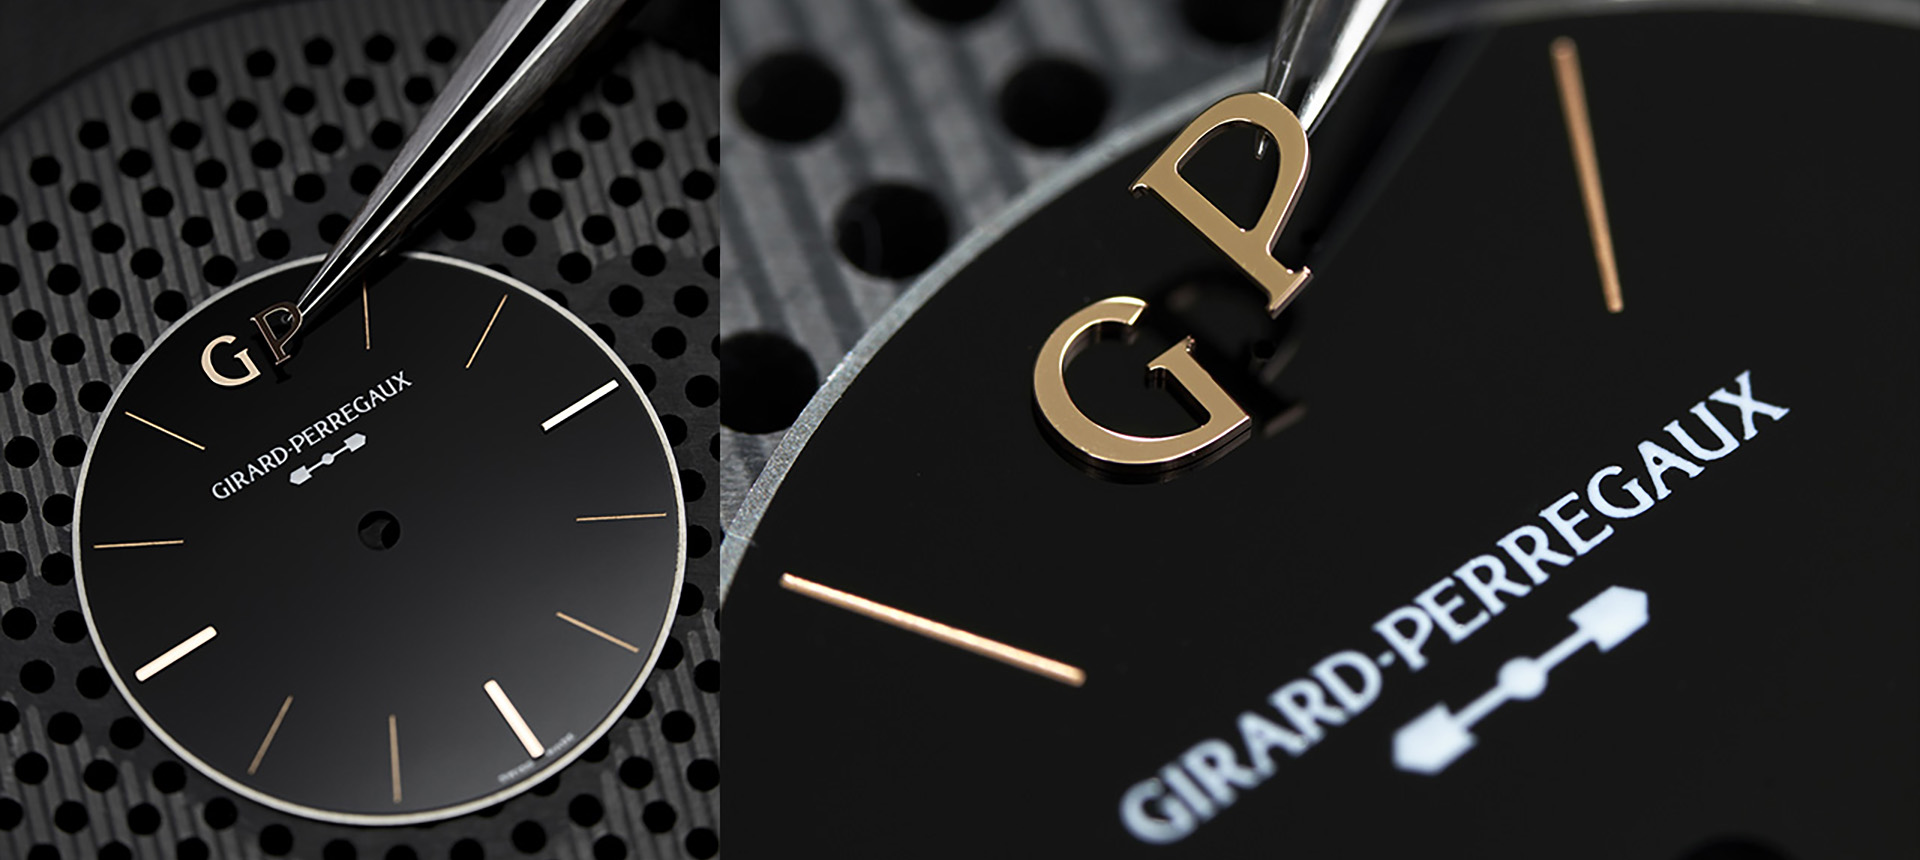 The Onyx Story From Girard-Perregaux